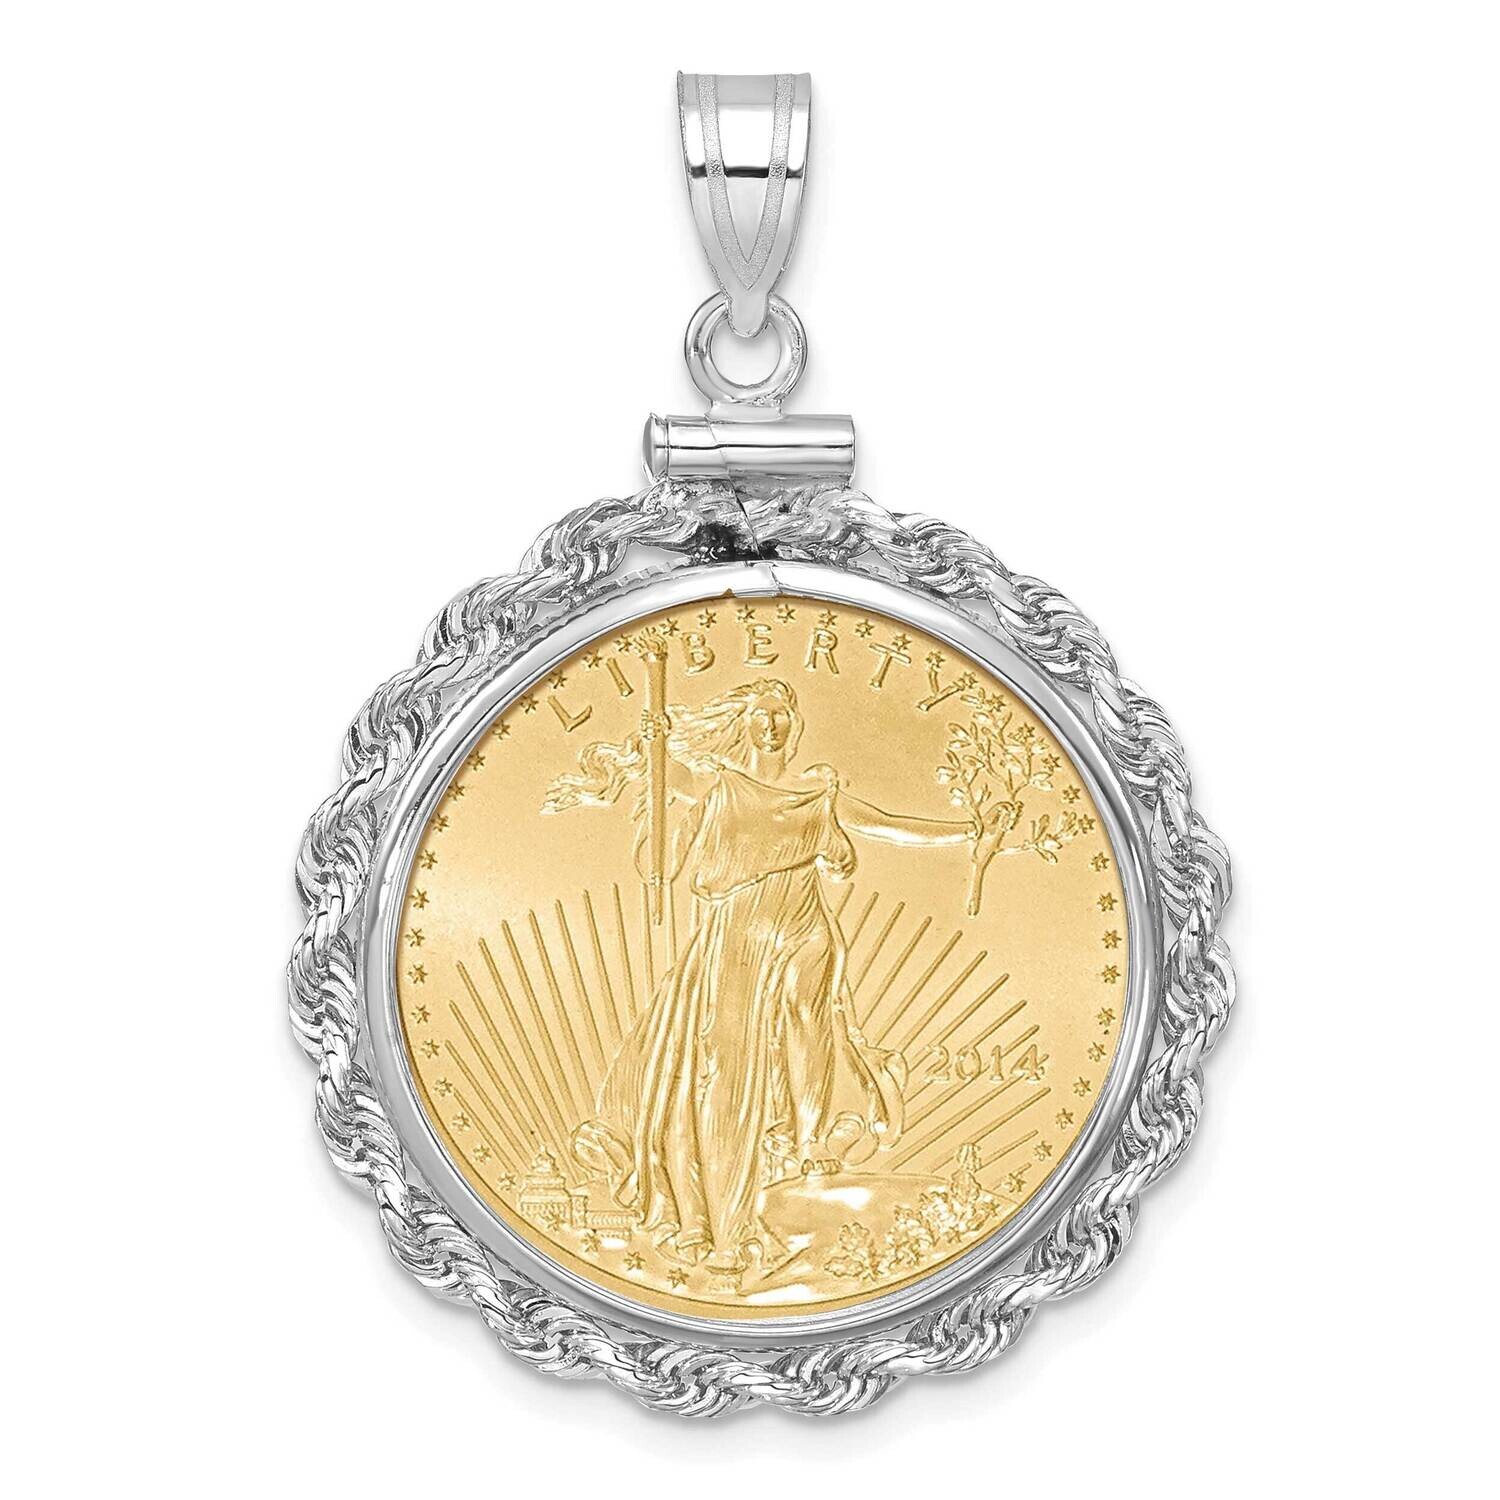 WidebDistinguished Coin Jewelry Rope Screw Top Mounted 1/4Oz American Eagle Coin Bezel Pendant 14k White Gold C1215W/22.0C